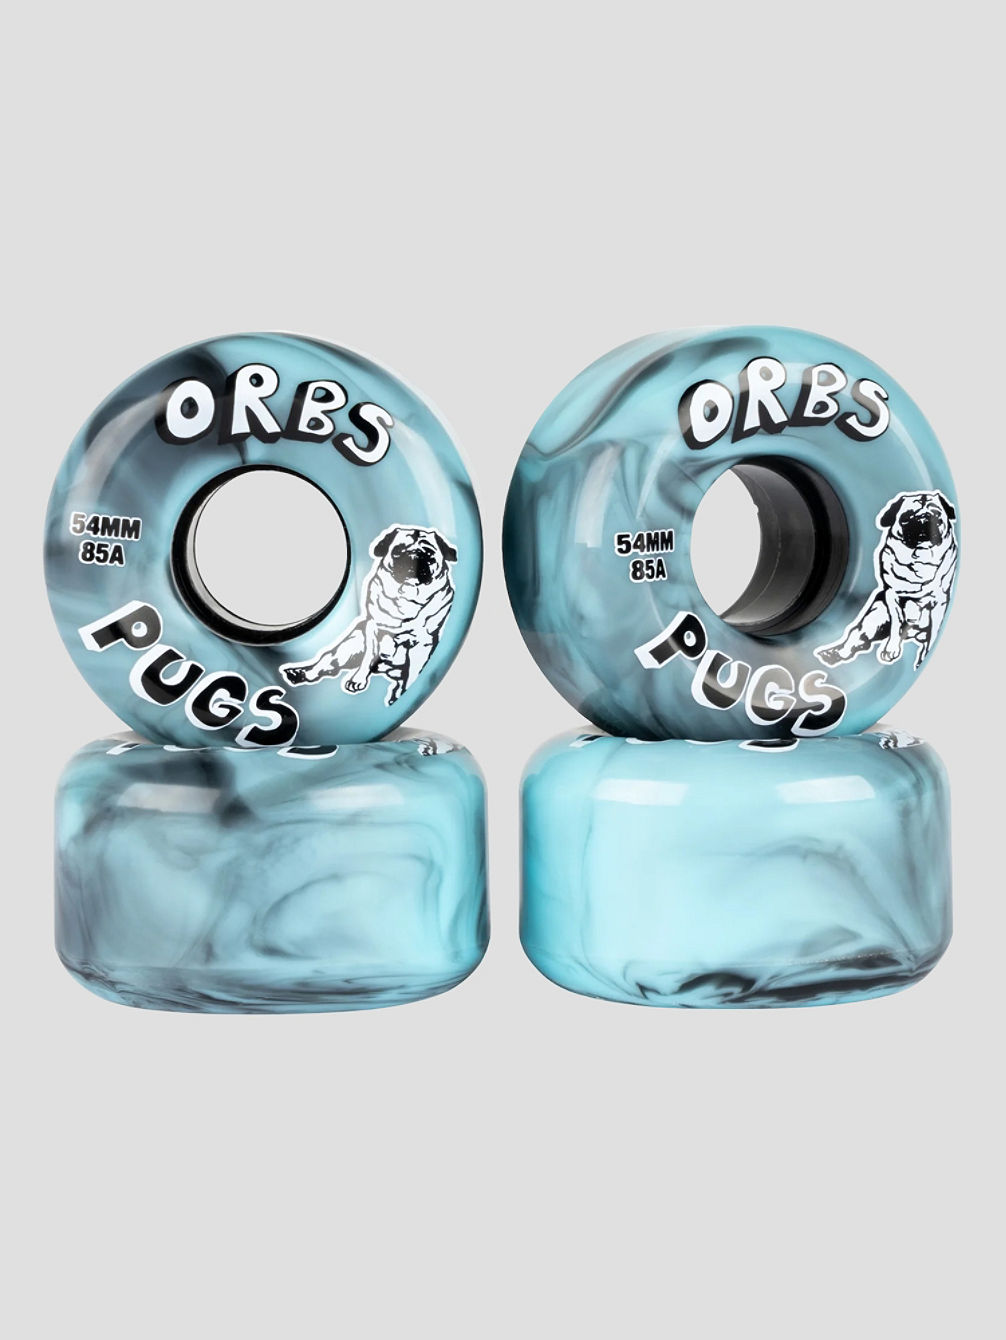 Orbs Pugs Swirls Conical 85A 54mm Ruote